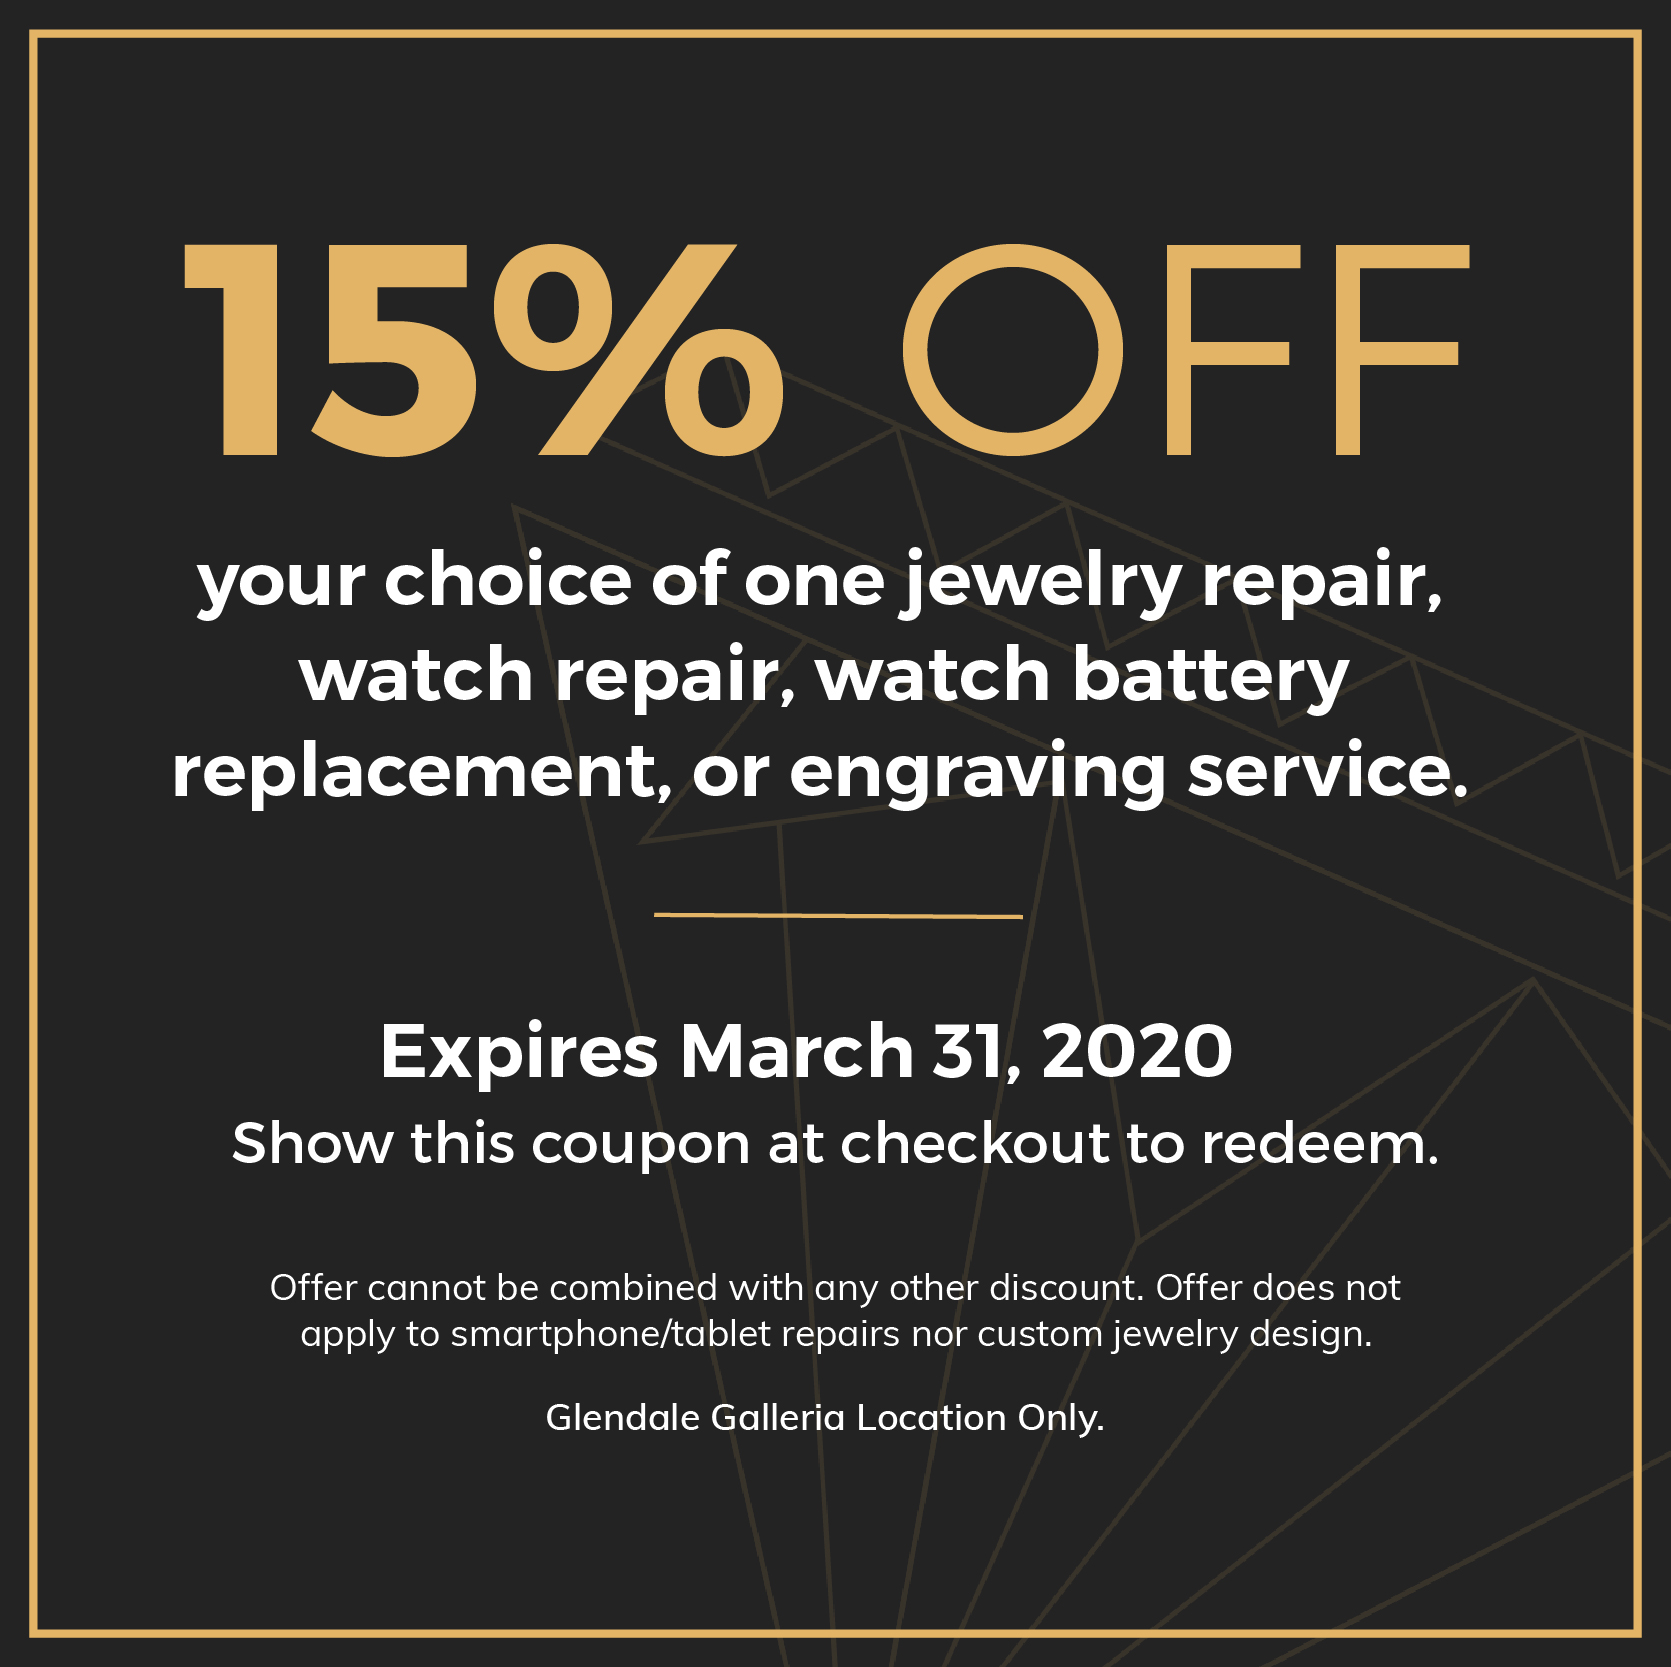 15% OFF. your choice of one jewelry repair, watch repair, watch battery replacement, or engraving service. Expires March 31, 2020. Show this coupon at checkout to redeem. Offer cannot be combined with any other discount. Offer does not apply to smartphone/tablet repairs nor custom jewelry design. Glendale Galleria Location Only.